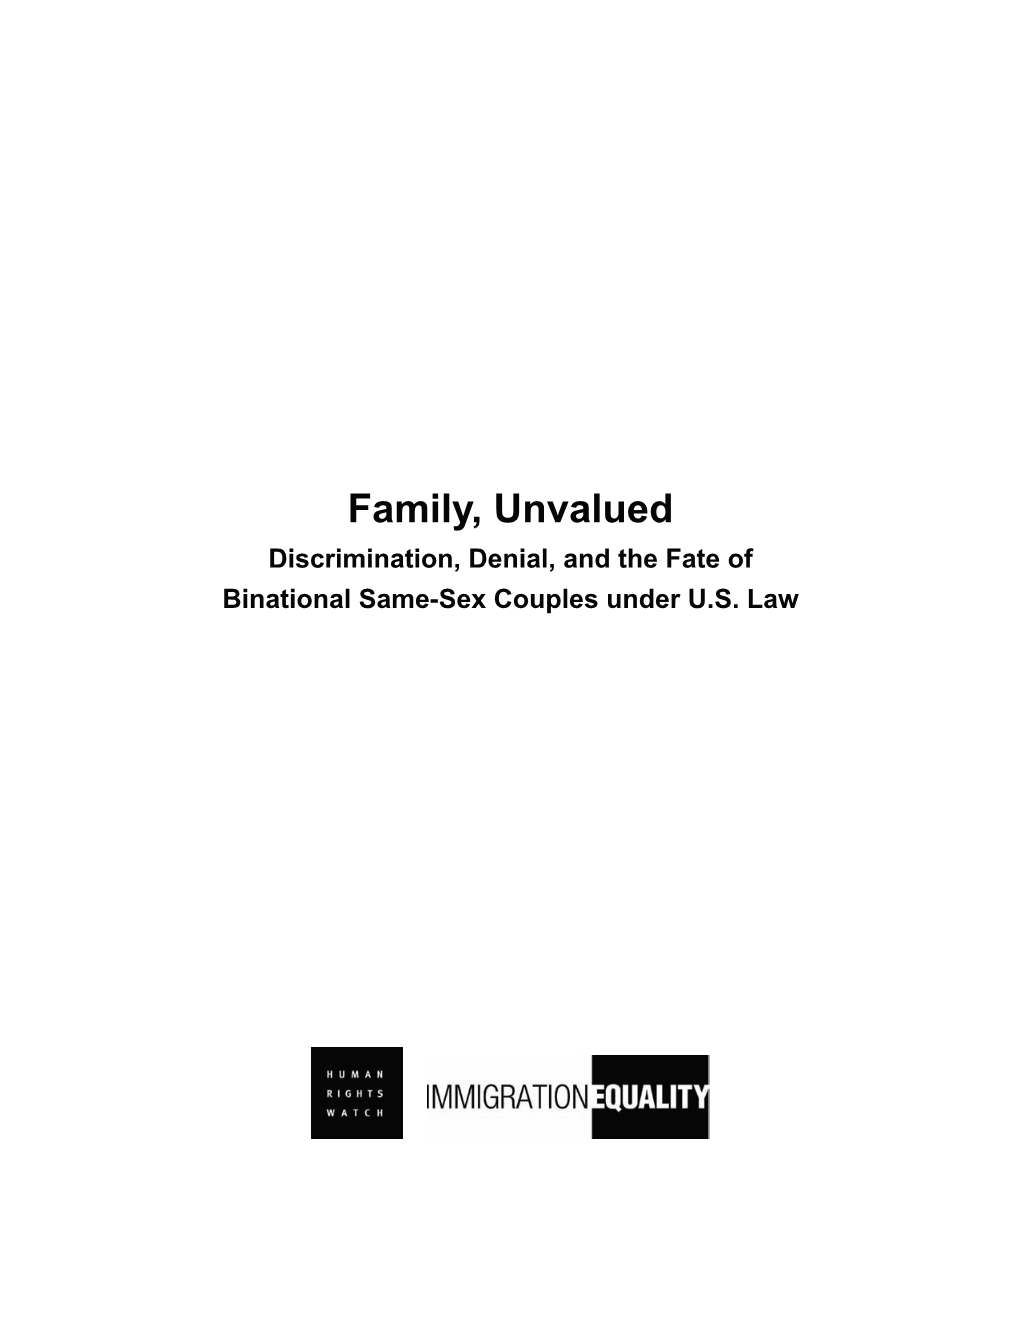 Family, Unvalued Discrimination, Denial, and the Fate of Binational Same-Sex Couples Under U.S